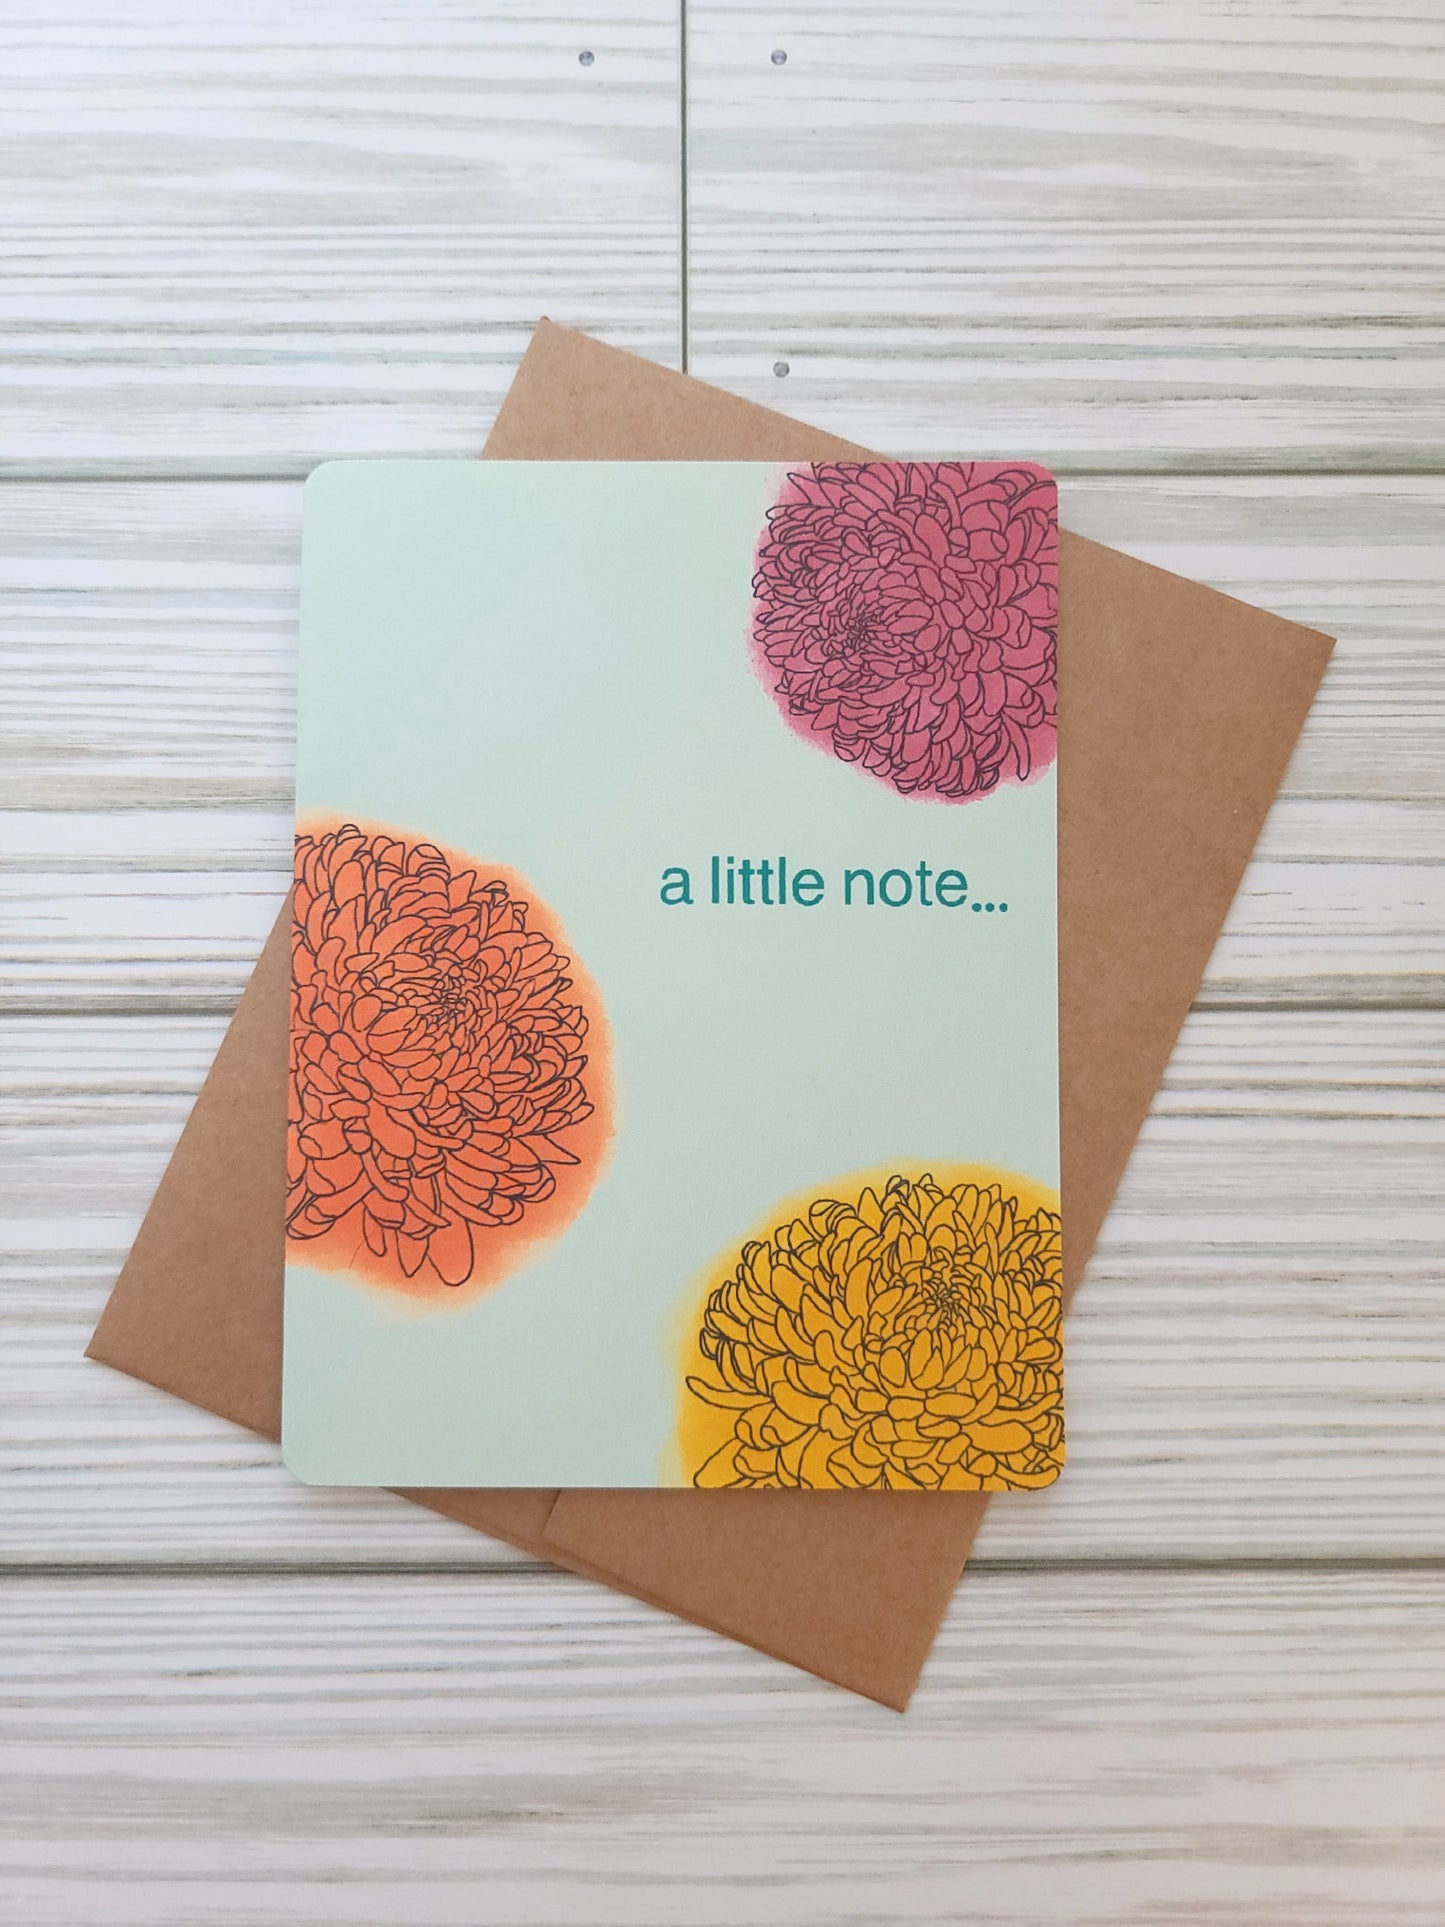 A Little Note with Flowers Handmade Greeting Card - Recycled Paper and Kraft Envelop - Overhead Shot